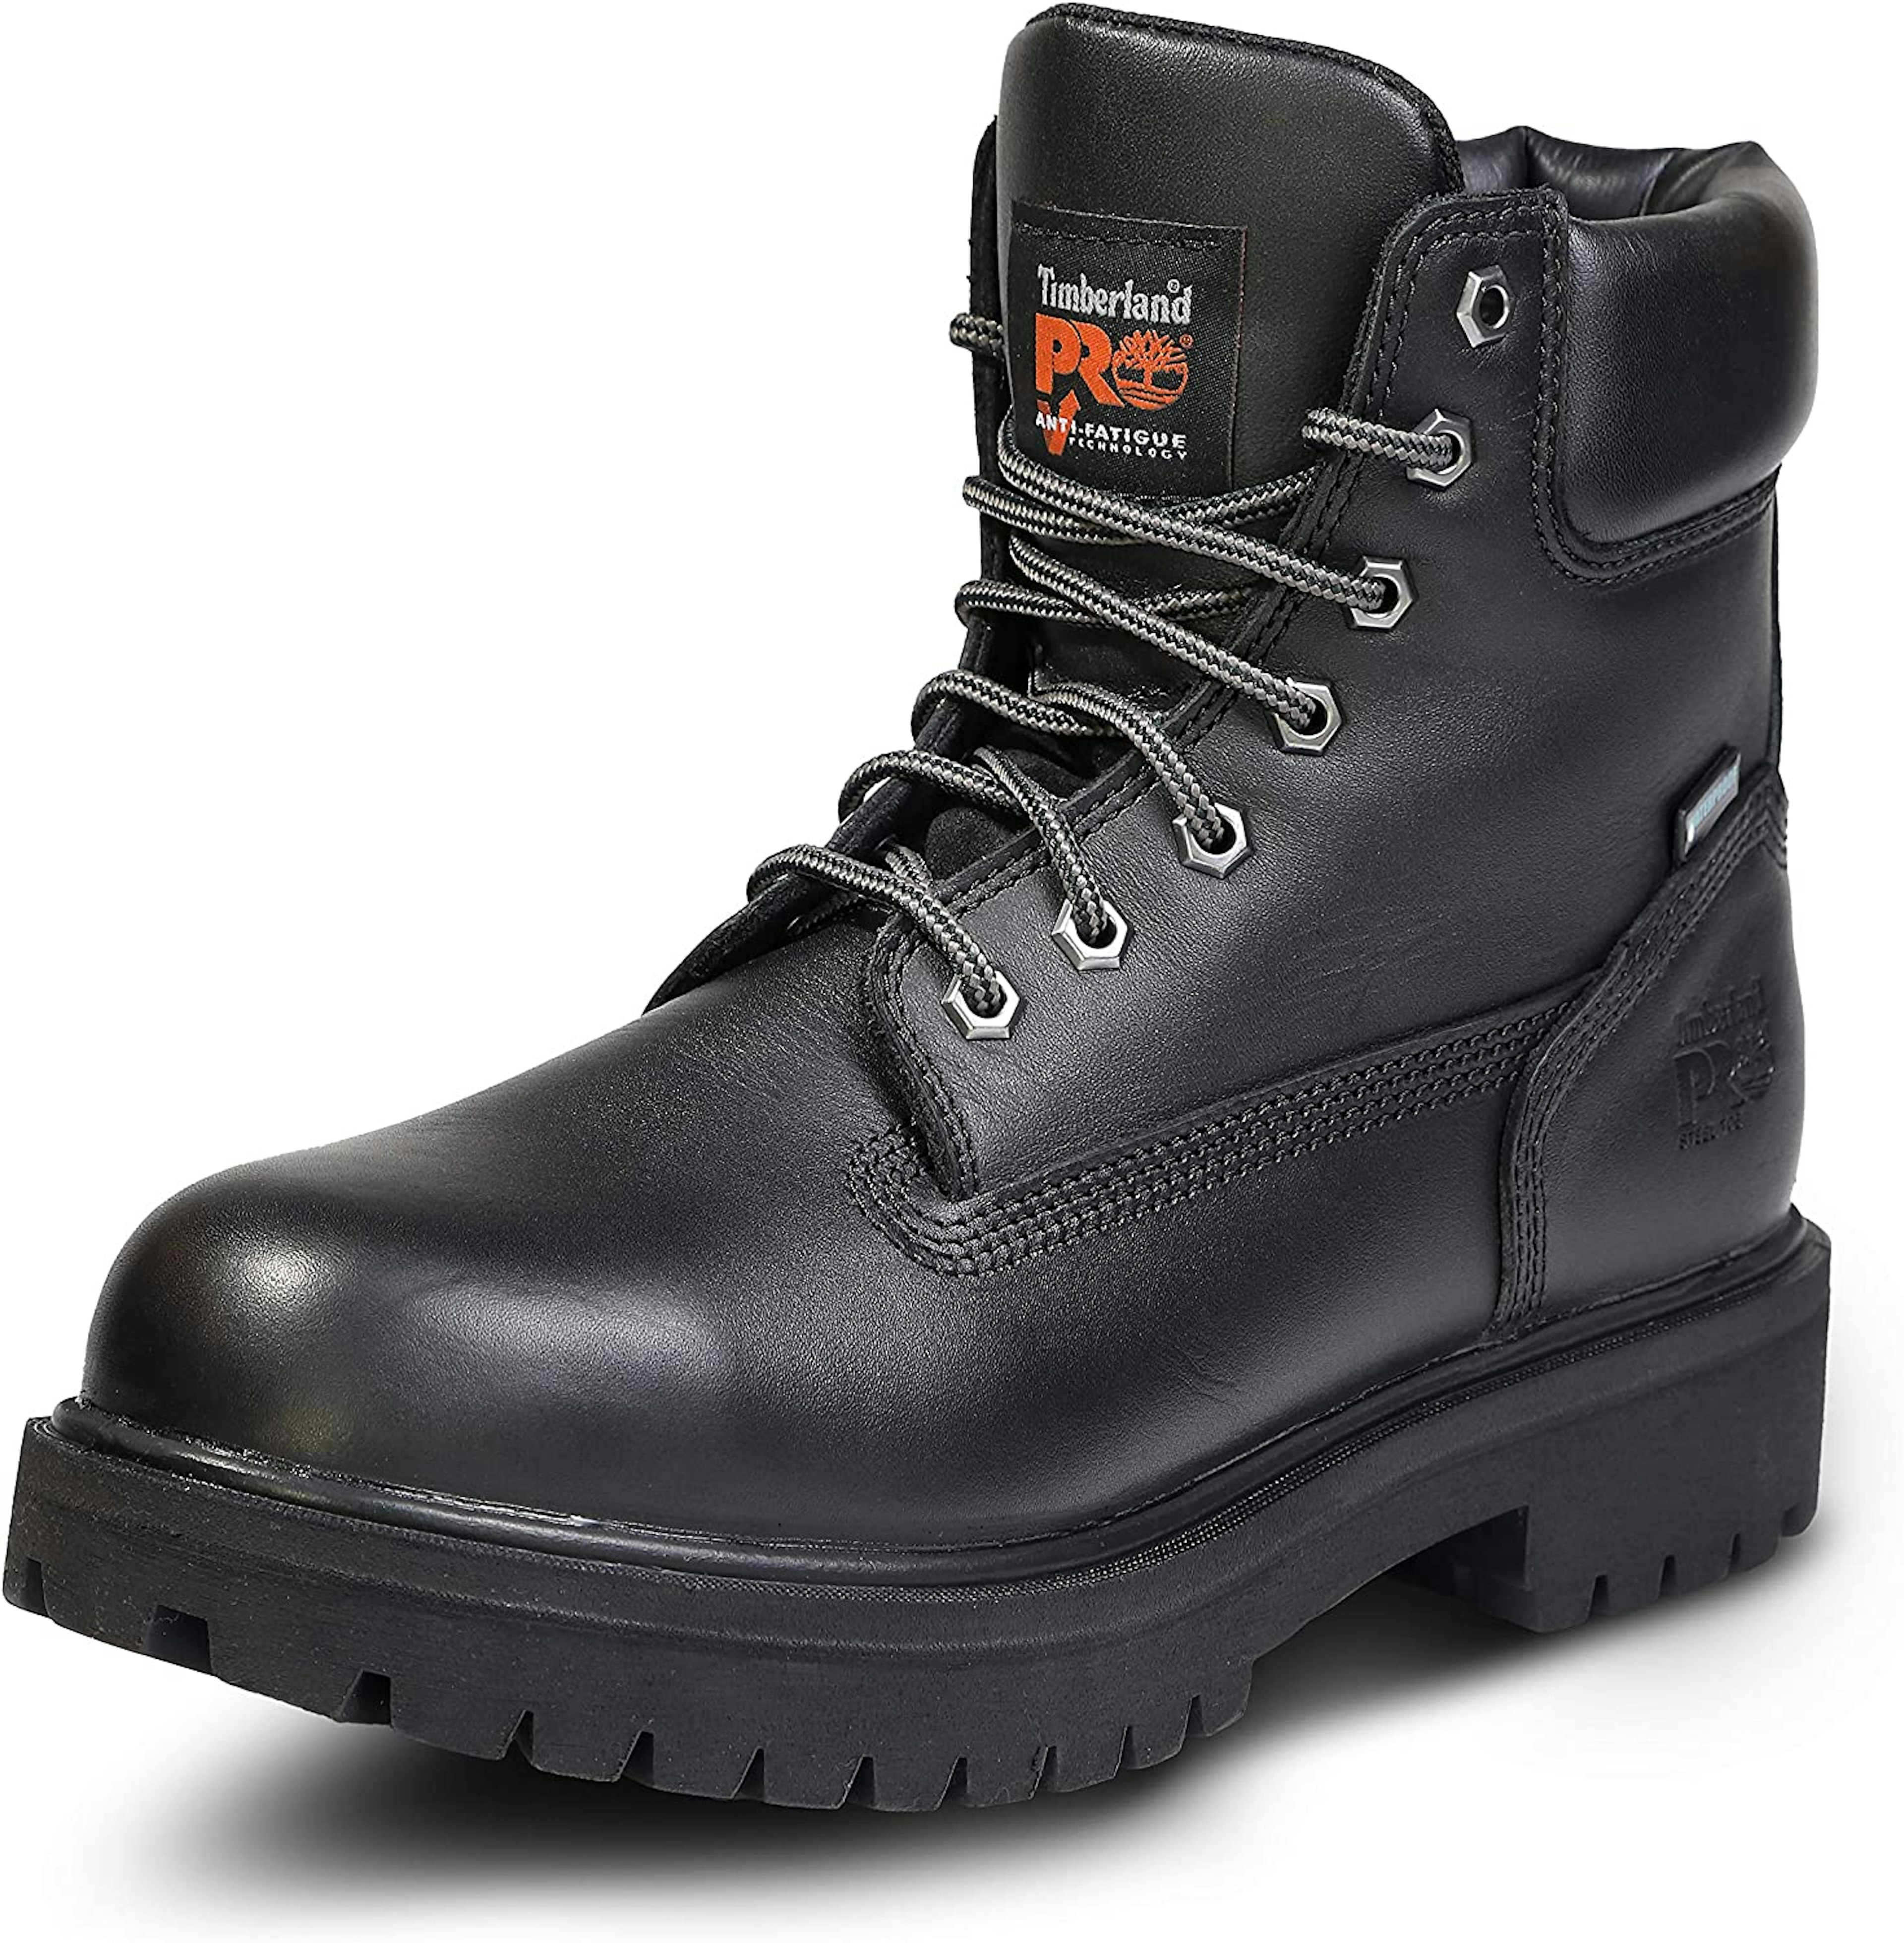 Best Shoes for Delivery Drivers - Timberland Steel Toecap Work Boot